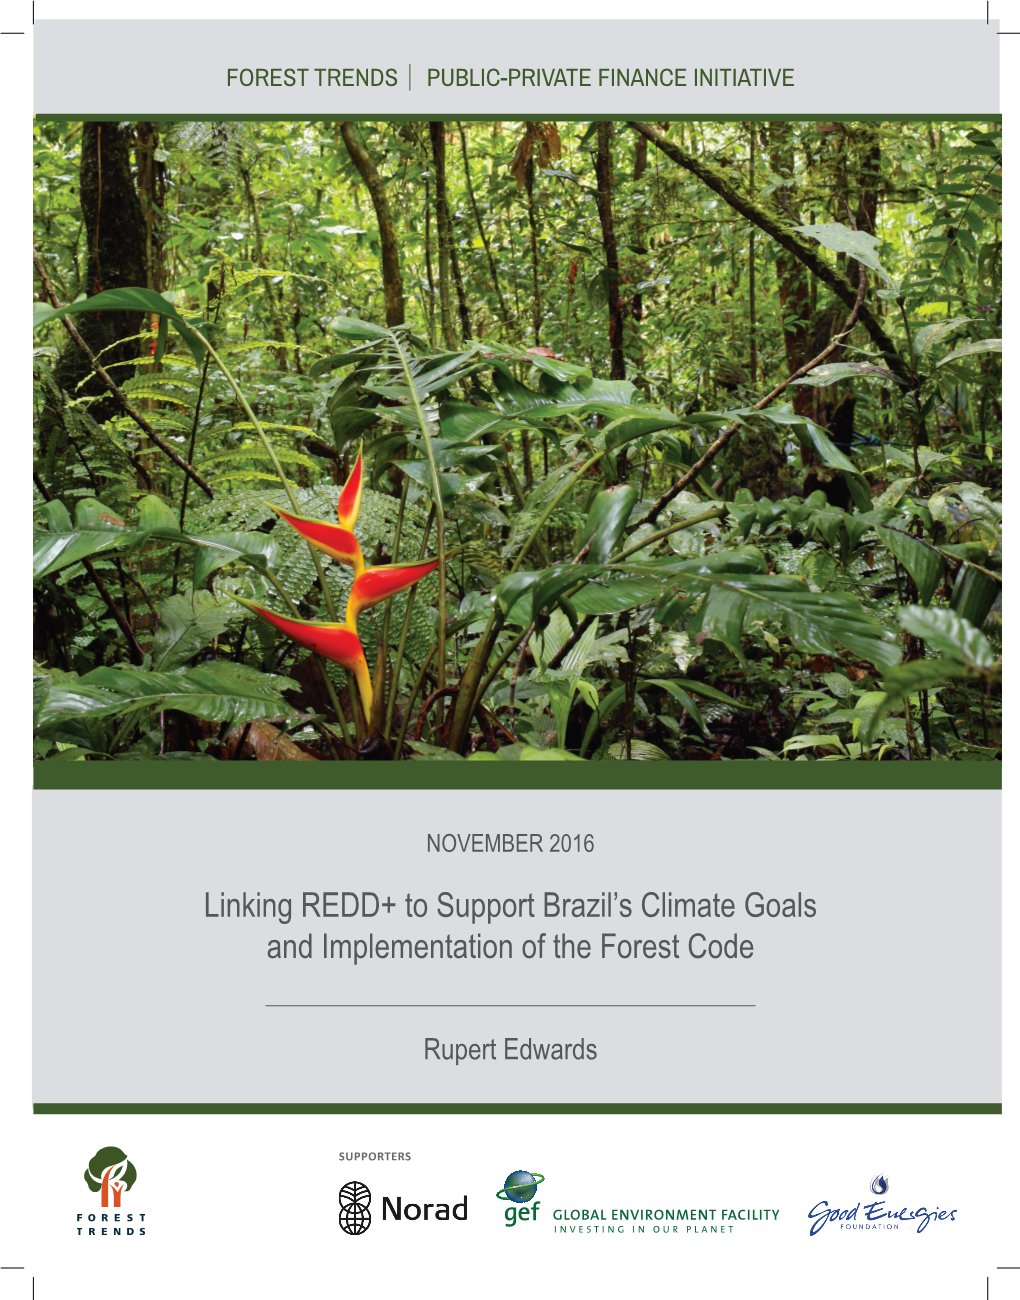 Linking REDD+ to Support Brazil's Climate Goals and Implementation